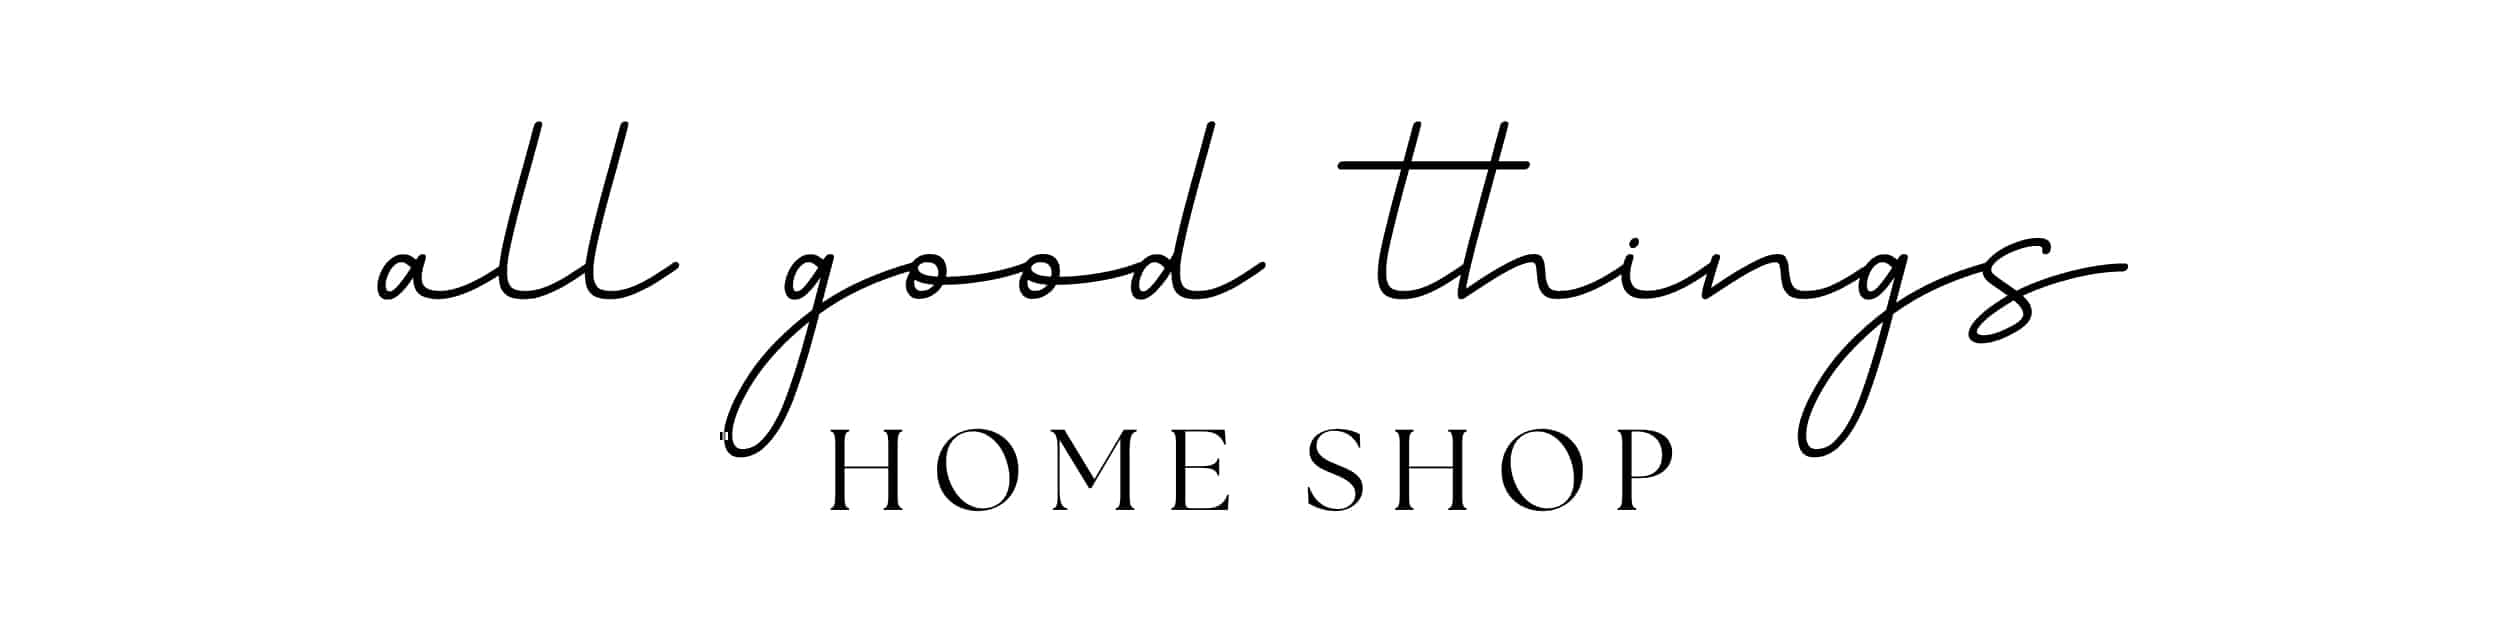 Entry: All Good Things Home Shop